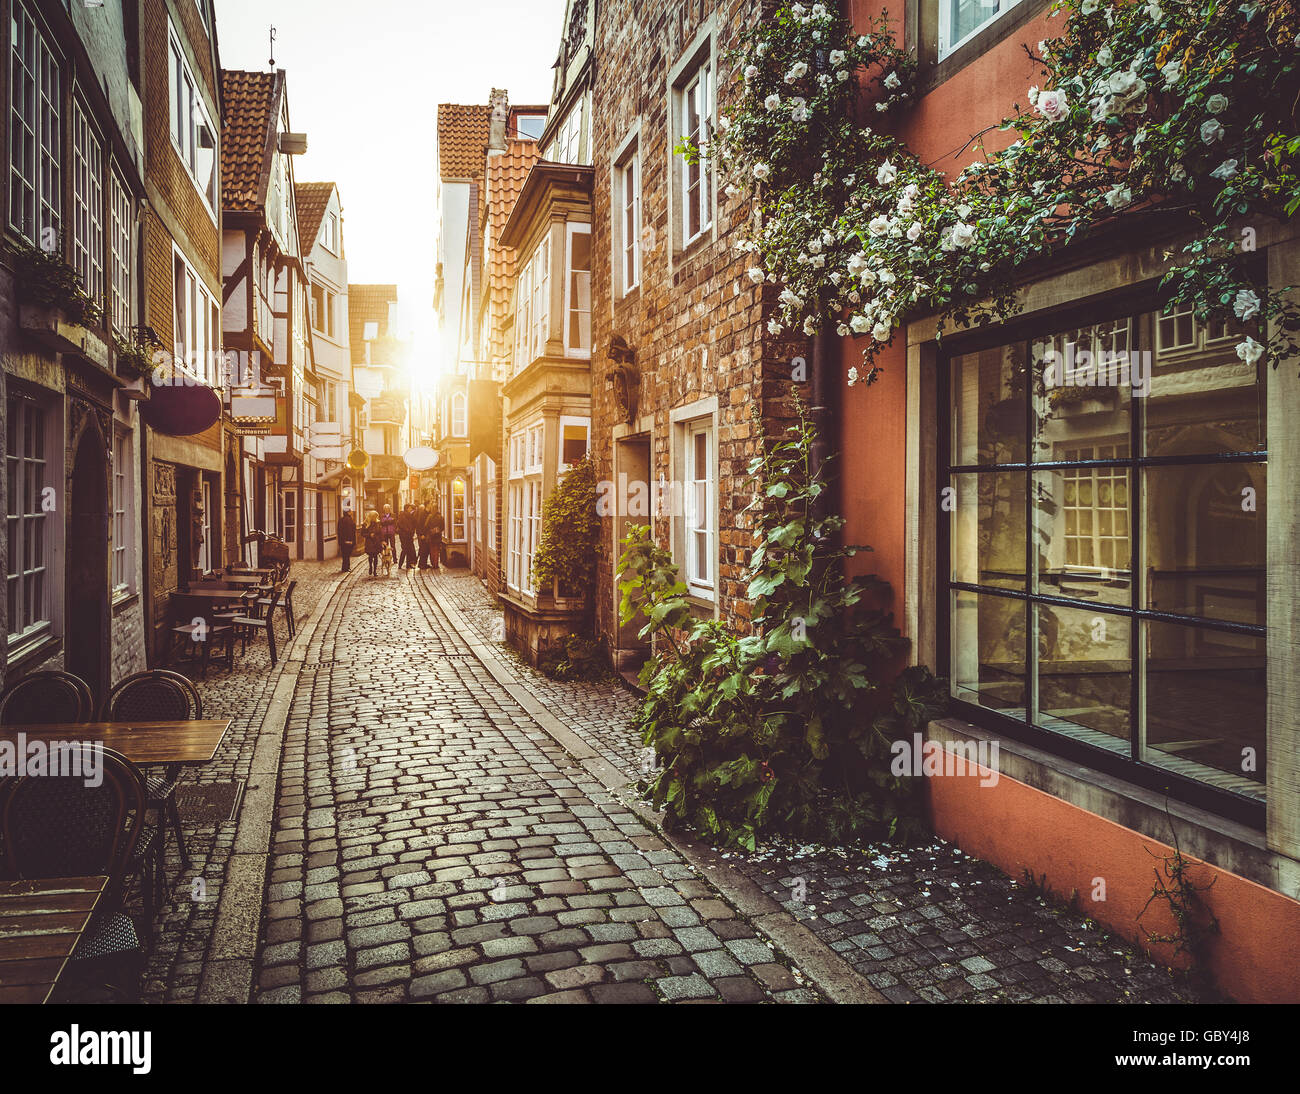 Enchanting street scene in an old town in Europe at sunset with retro vintage filter effect Stock Photo